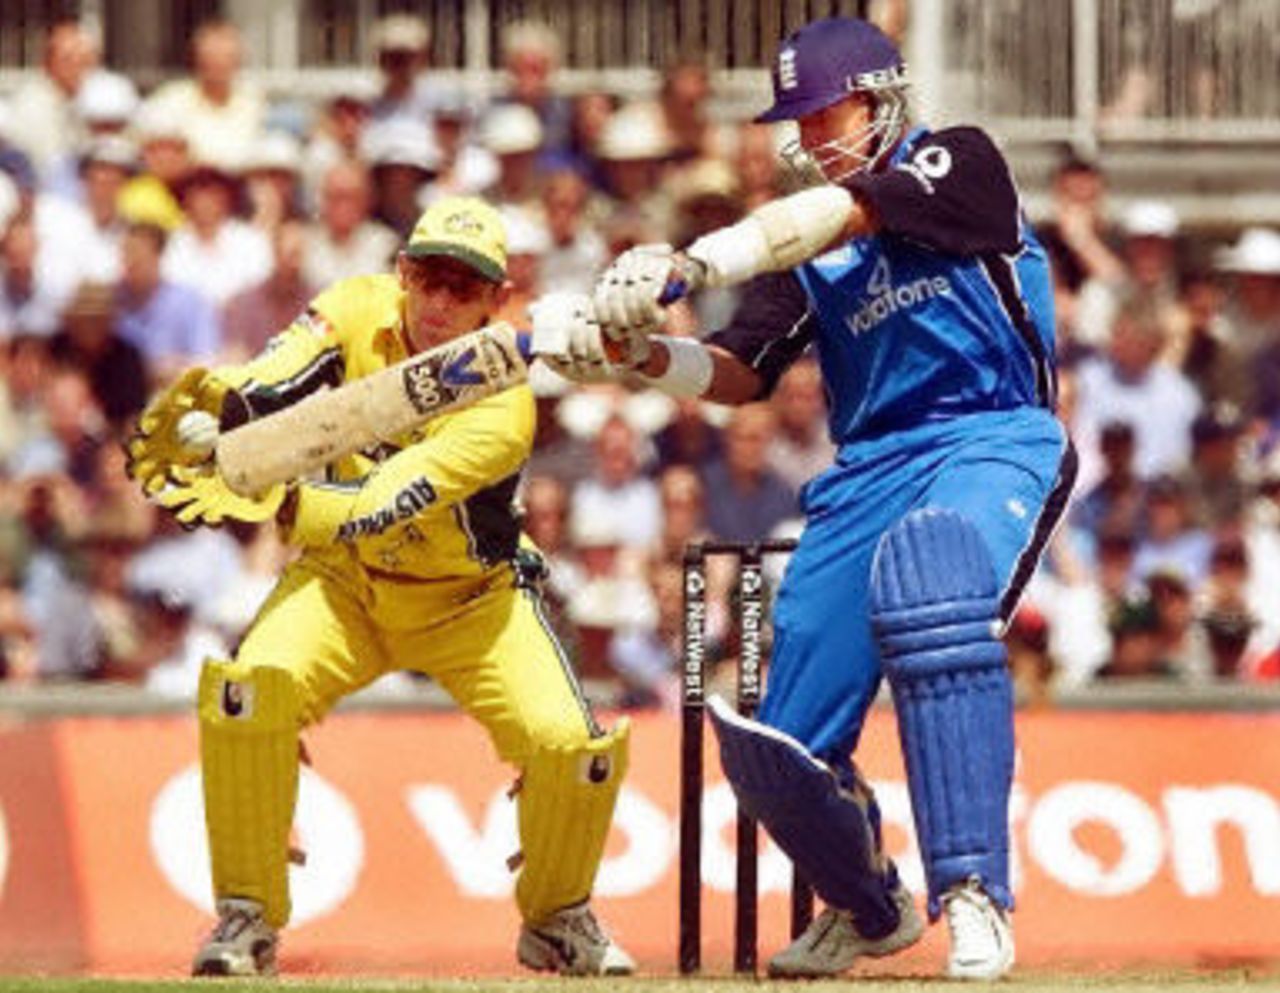 Alec Stewart hits out as Adam Gilchrist looks on, 9th ODI at the Oval, 21 June 2001.